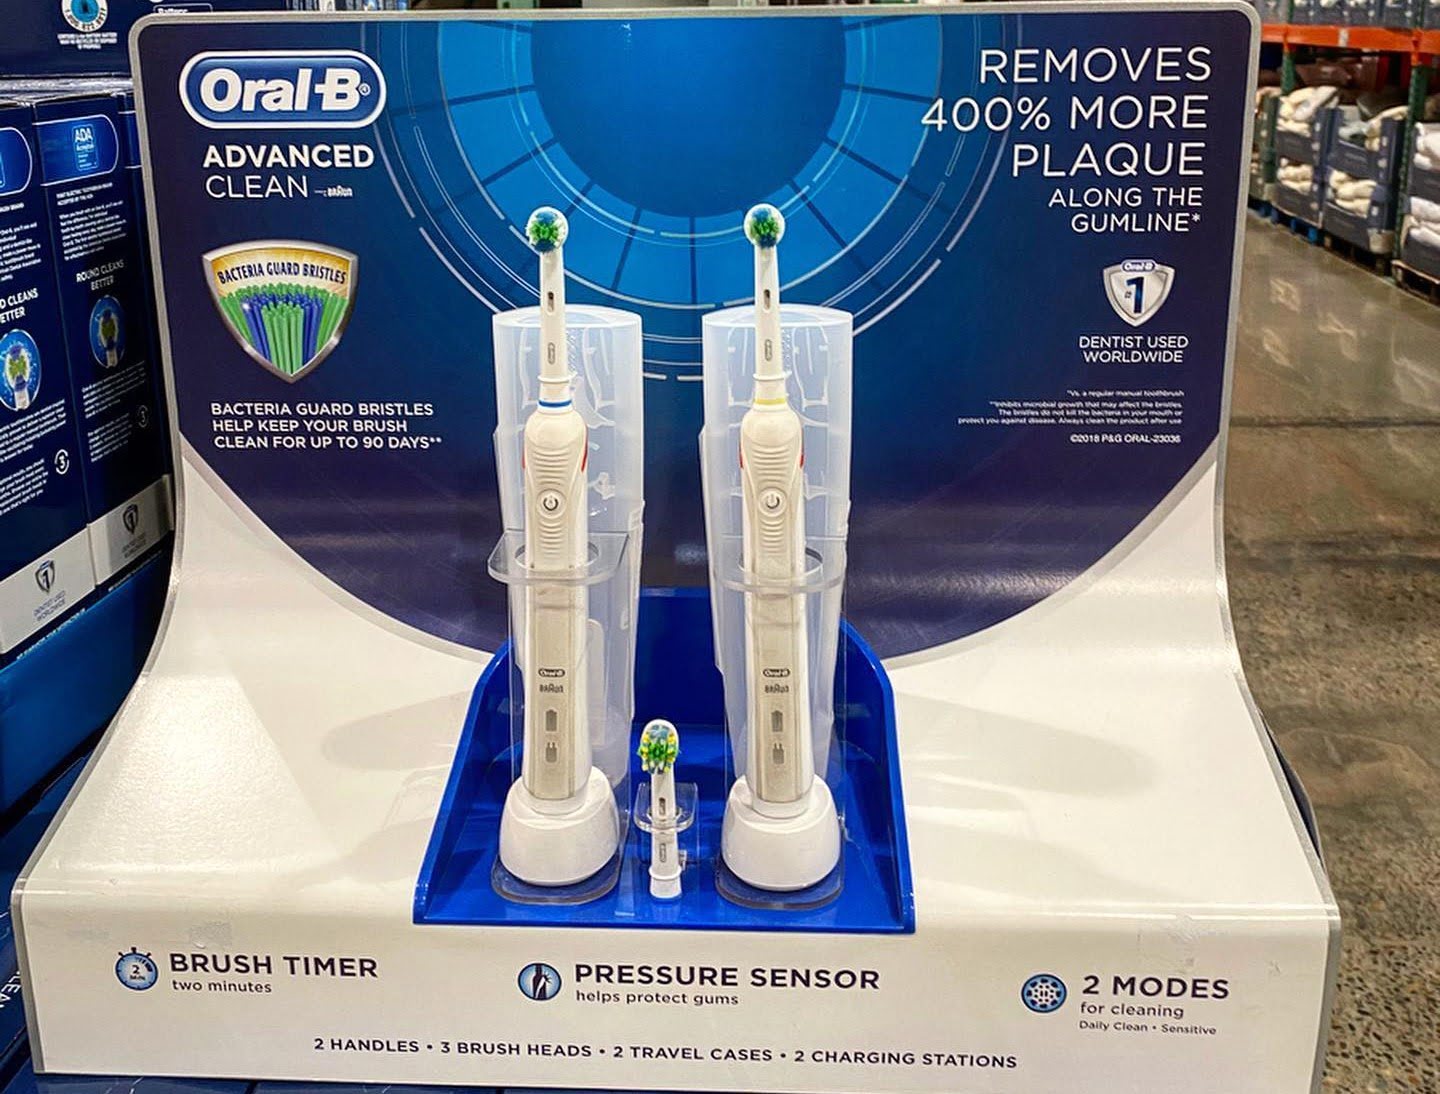 13 Best Oral-B Advanced Clean Electric Toothbrush For 2023